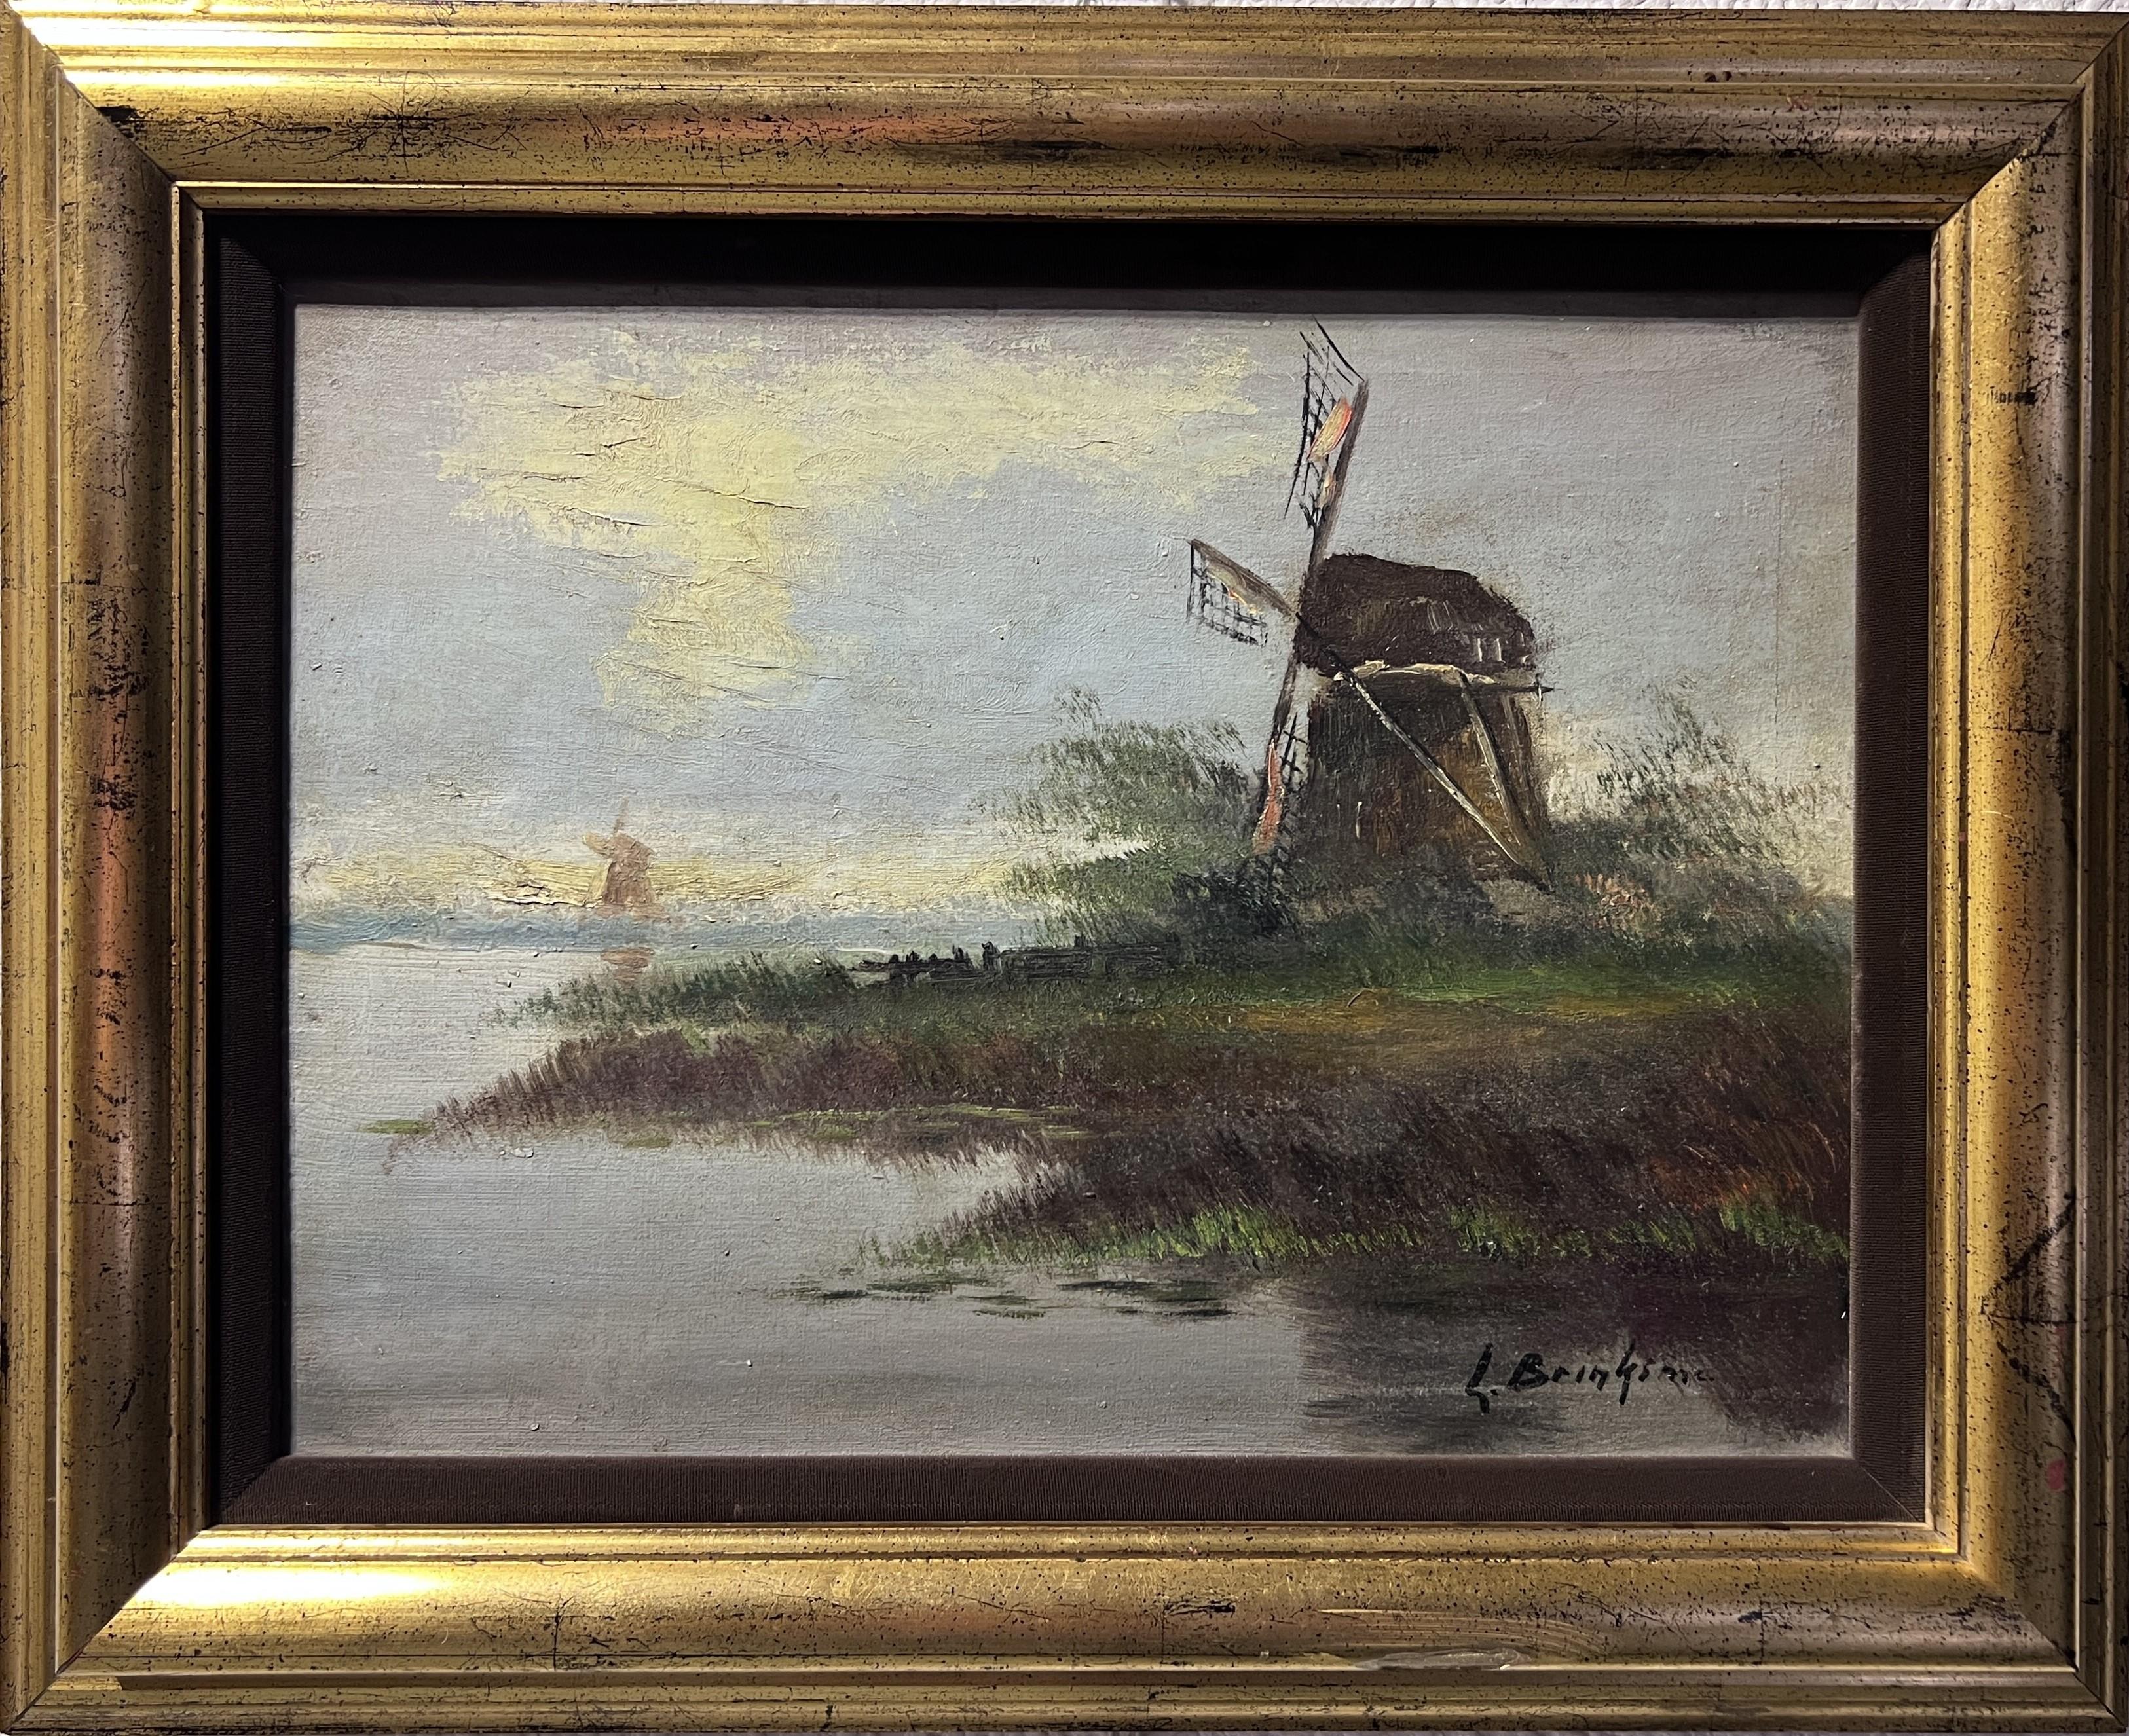 This is an original antique oil painting on canvas depicting a rural landscape with a water mill. 

Signed by the artist in the lower right, L. Brinksme. Titled in Arabic on the backside.

Dimensions (frame): 21” W x 17” H 
Dimensions (sight): 16” W